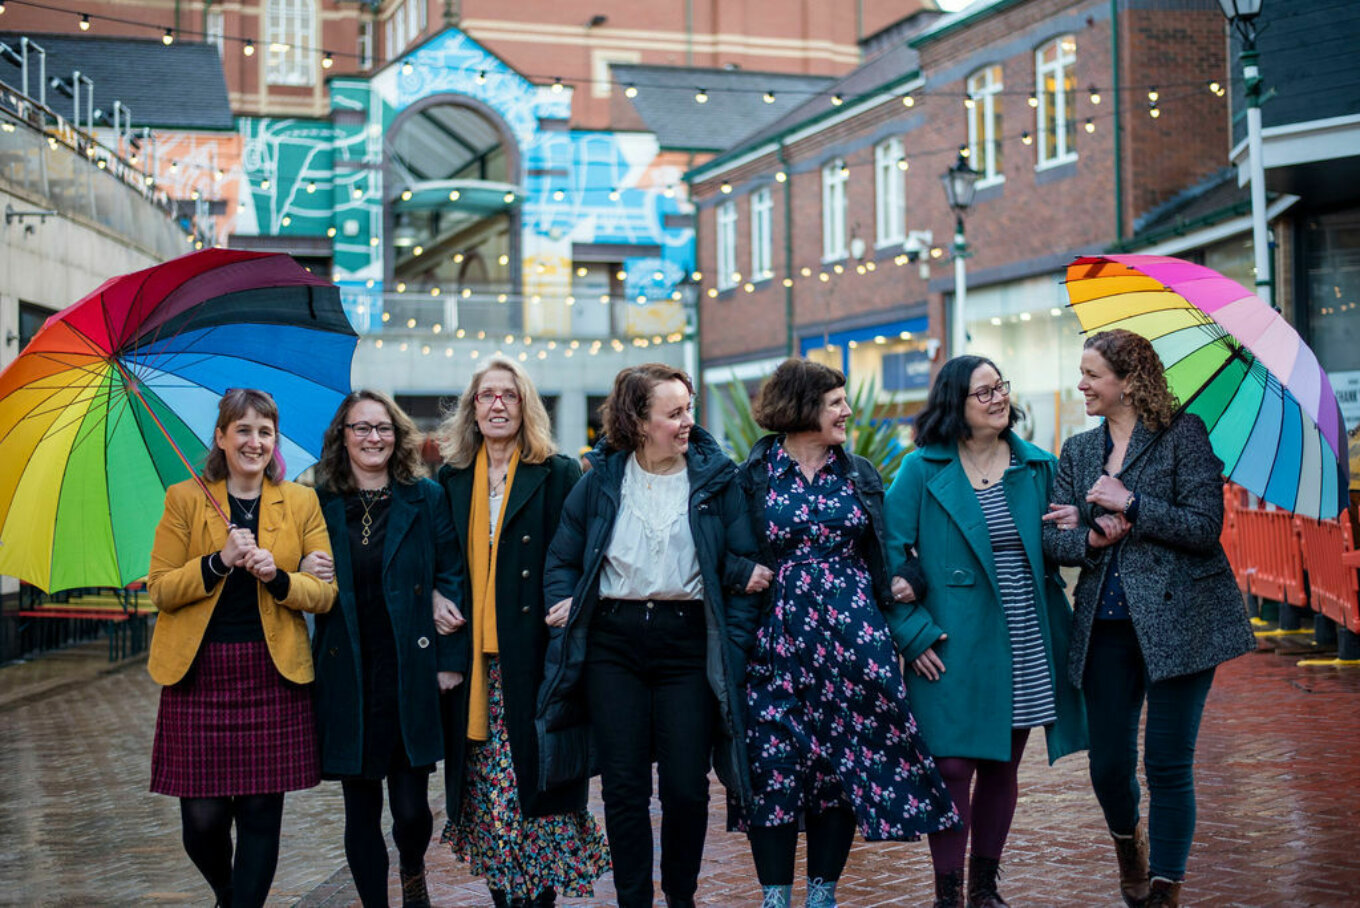 The Writers Workshop team, left to right - Rosie Carnall, Lorna Partington, Bryony Doran, Hannah Boursnell, Beverley Ward, Anne Grange, Anna Caig.